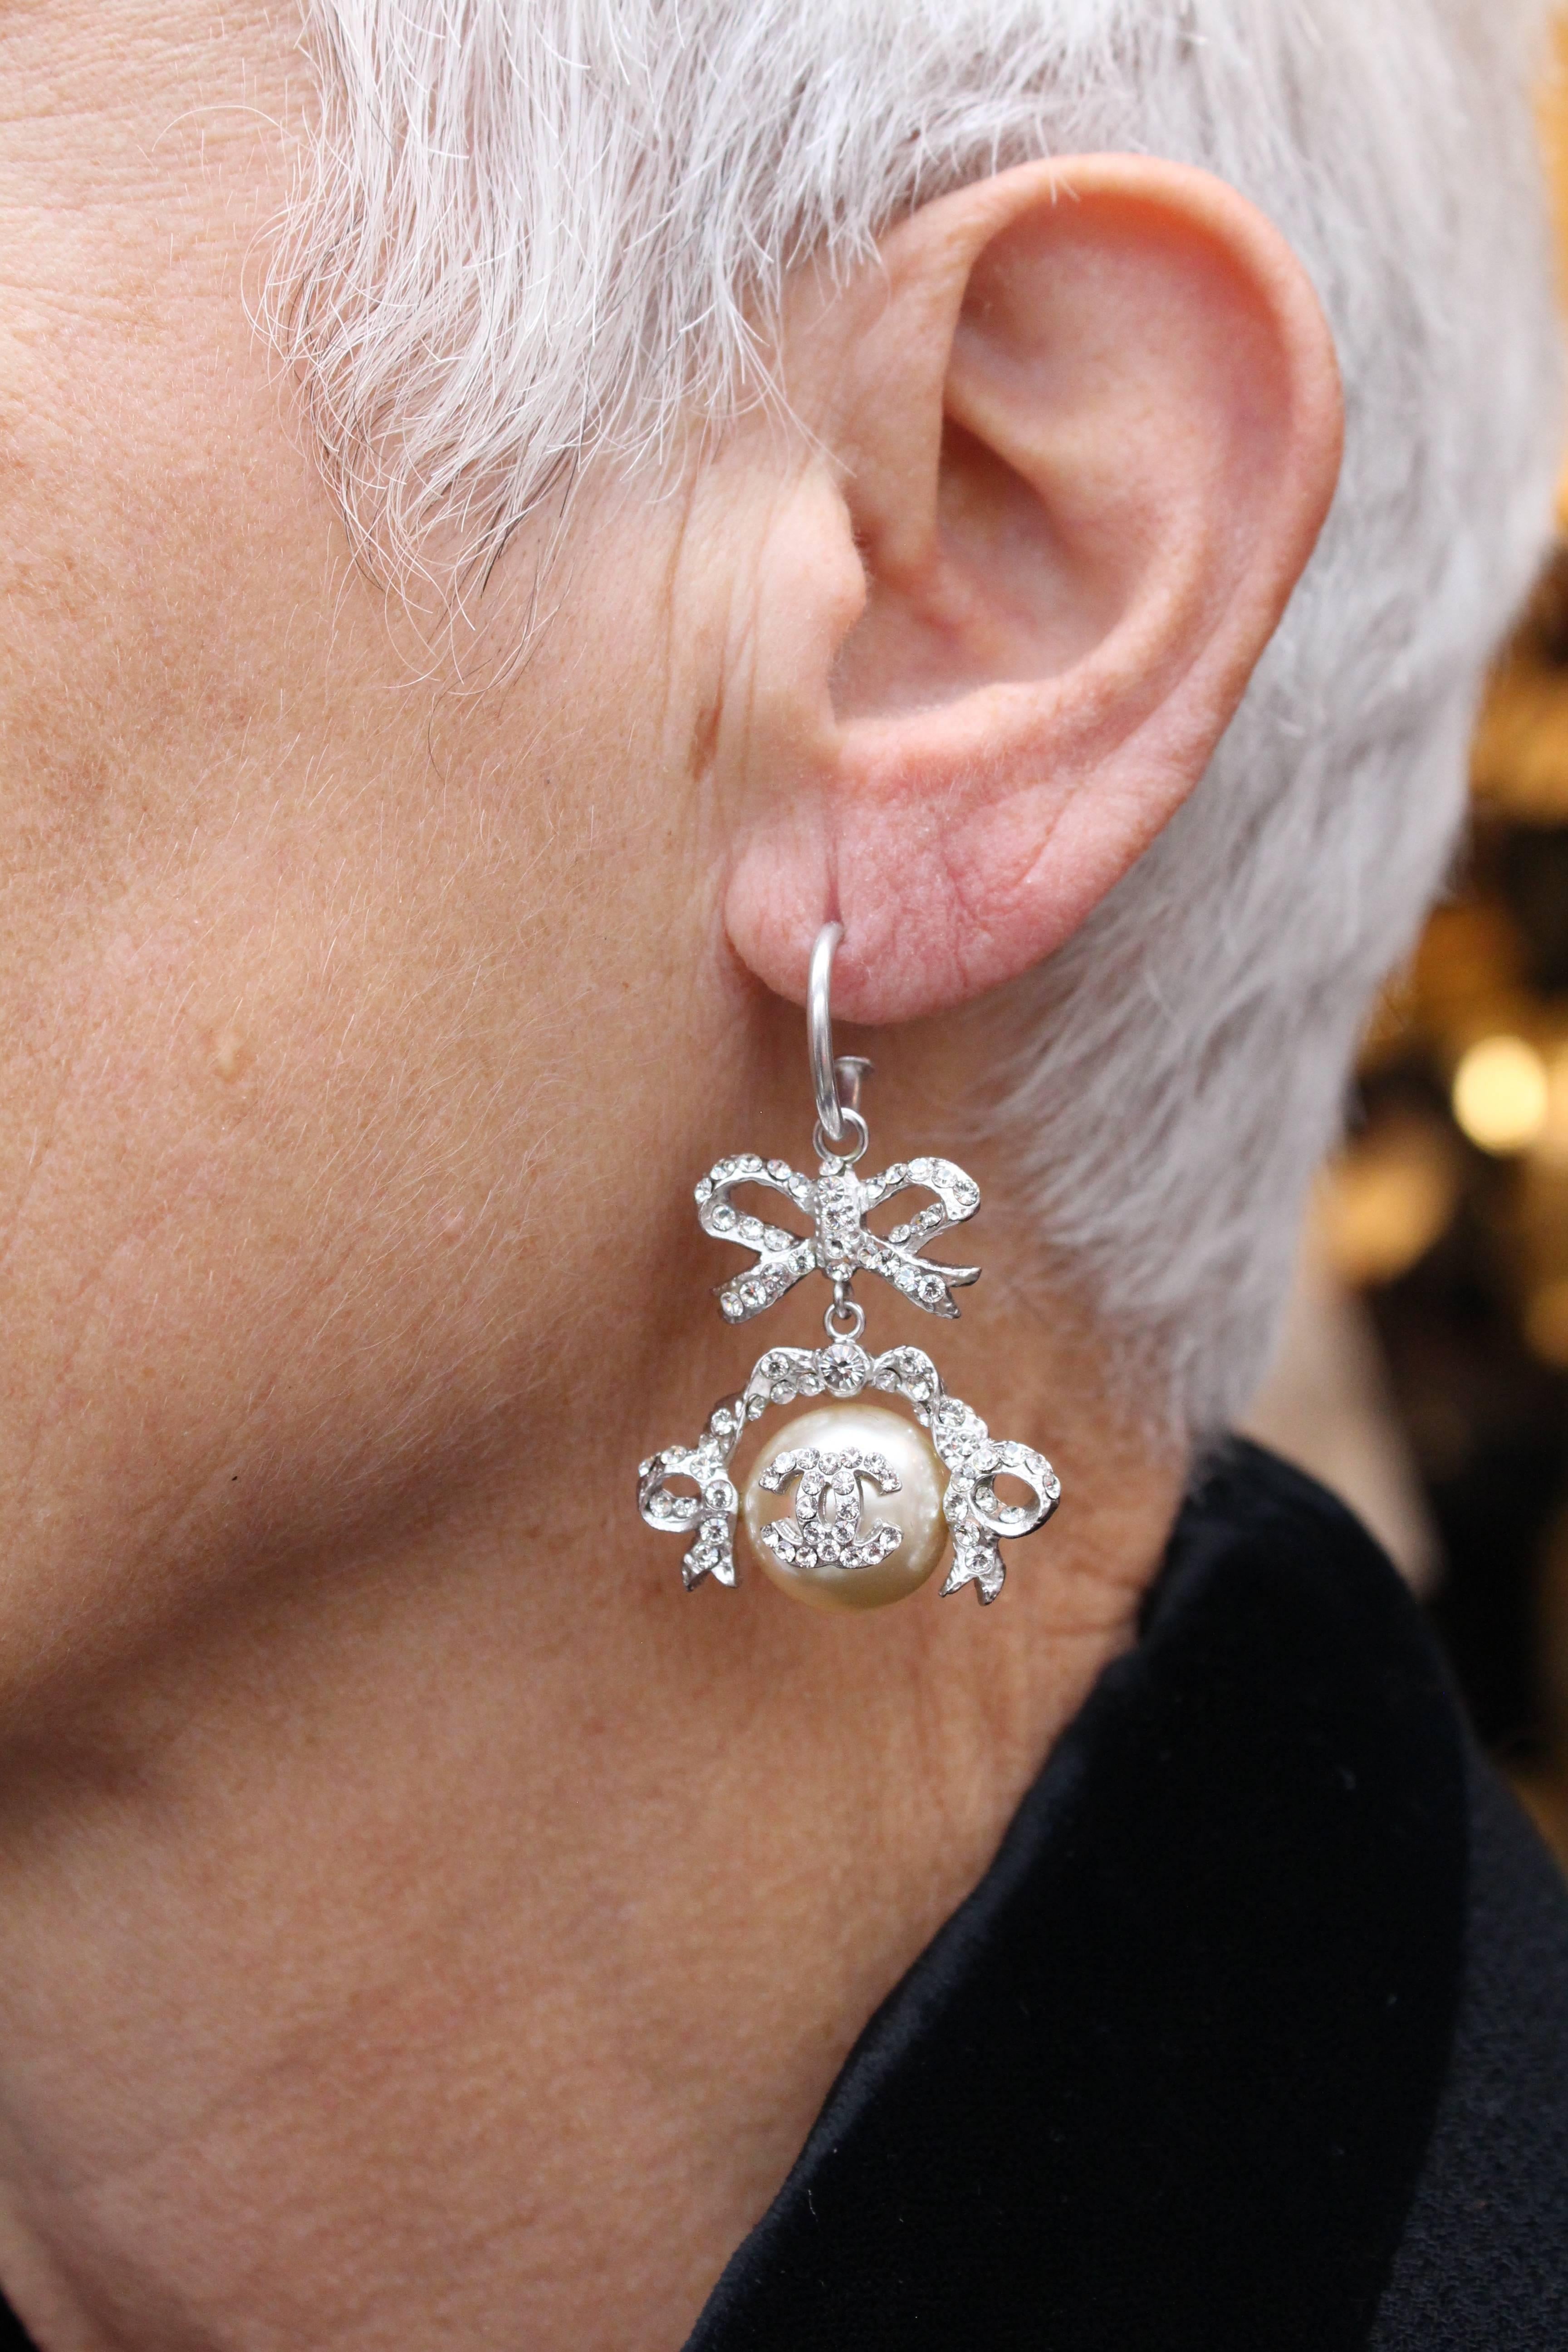 2004 Chanel gorgeous earrings representing a bow paved with rhinestones 4